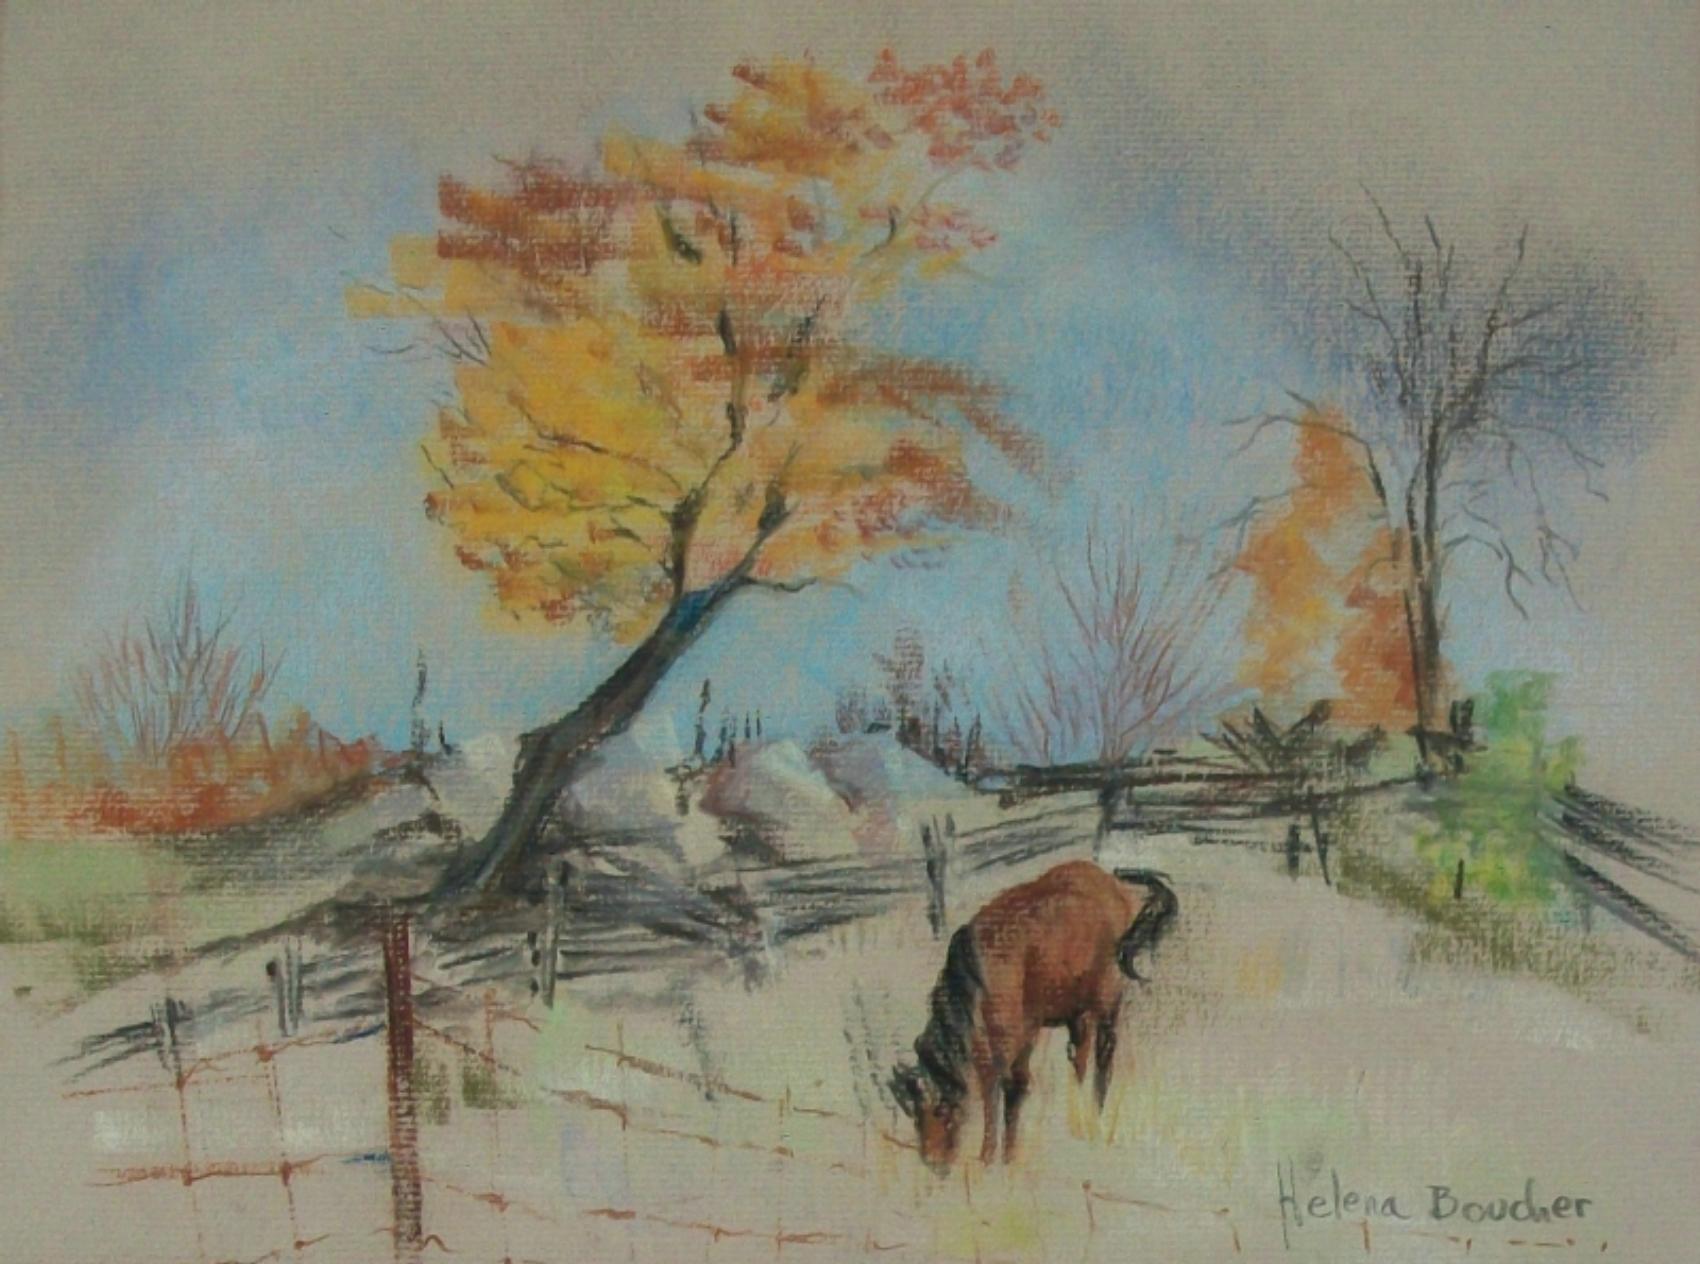 HELENA BOUCHER (Unknown/Unidentified Artist) - Vintage pastel landscape drawing on buff paper - featuring a horse in the foreground set against trees and a fence - drawing contained in a vintage double matte - signed lower right - Canada - mid 20th